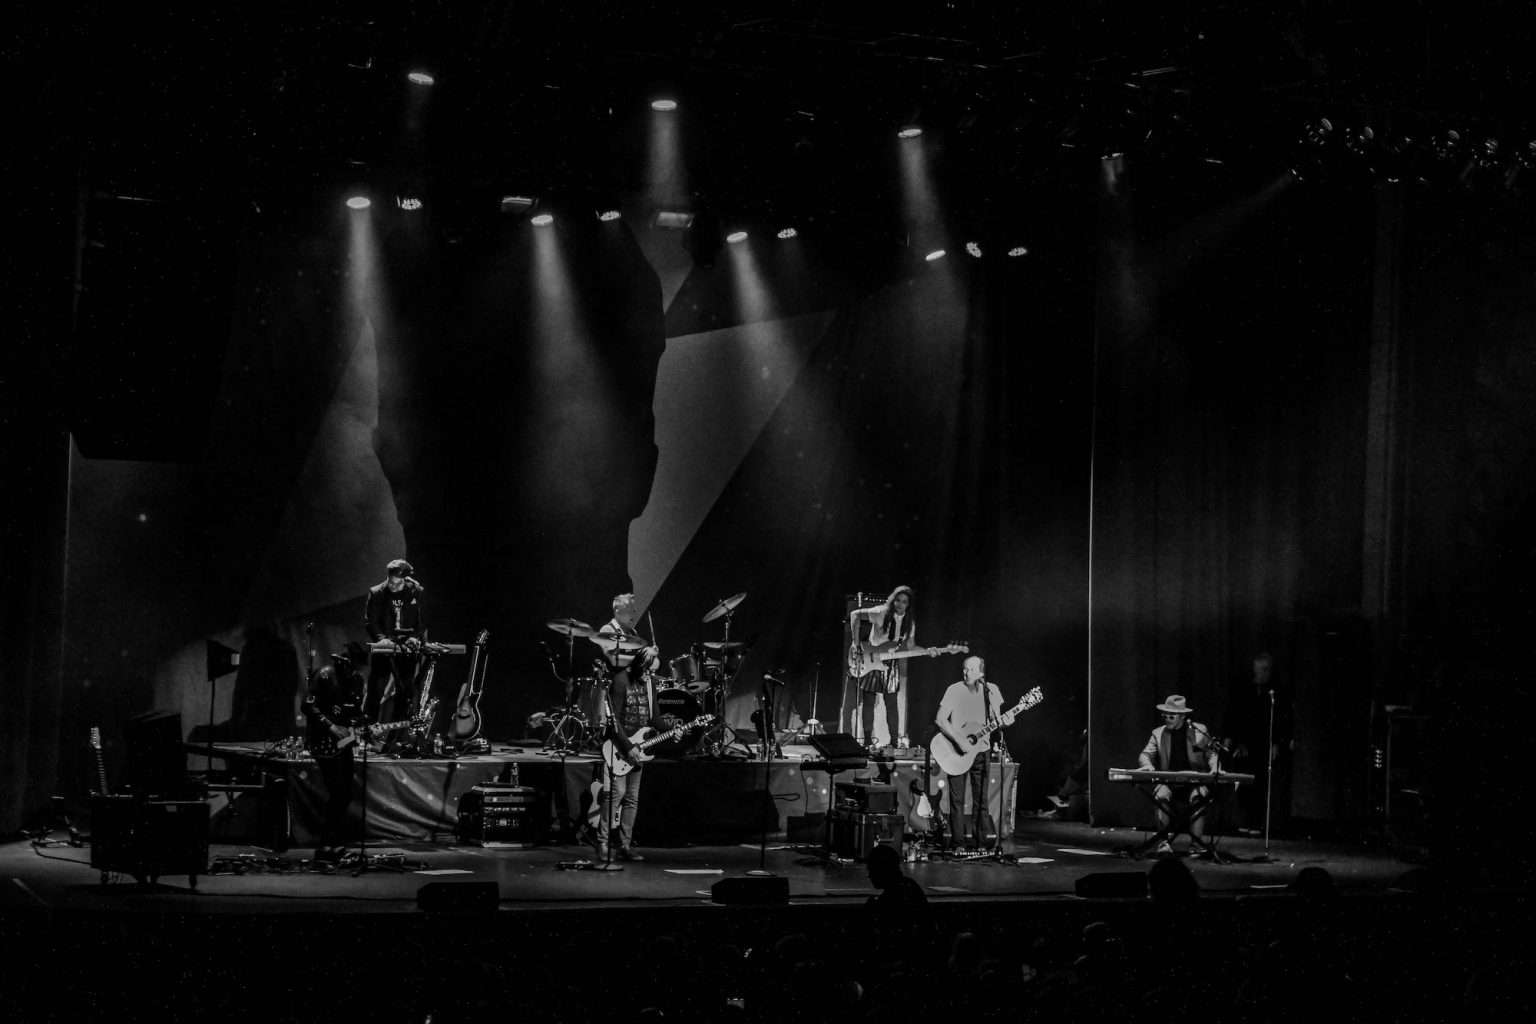 Celebrating David Bowie Live at Copernicus Center [GALLERY] Chicago